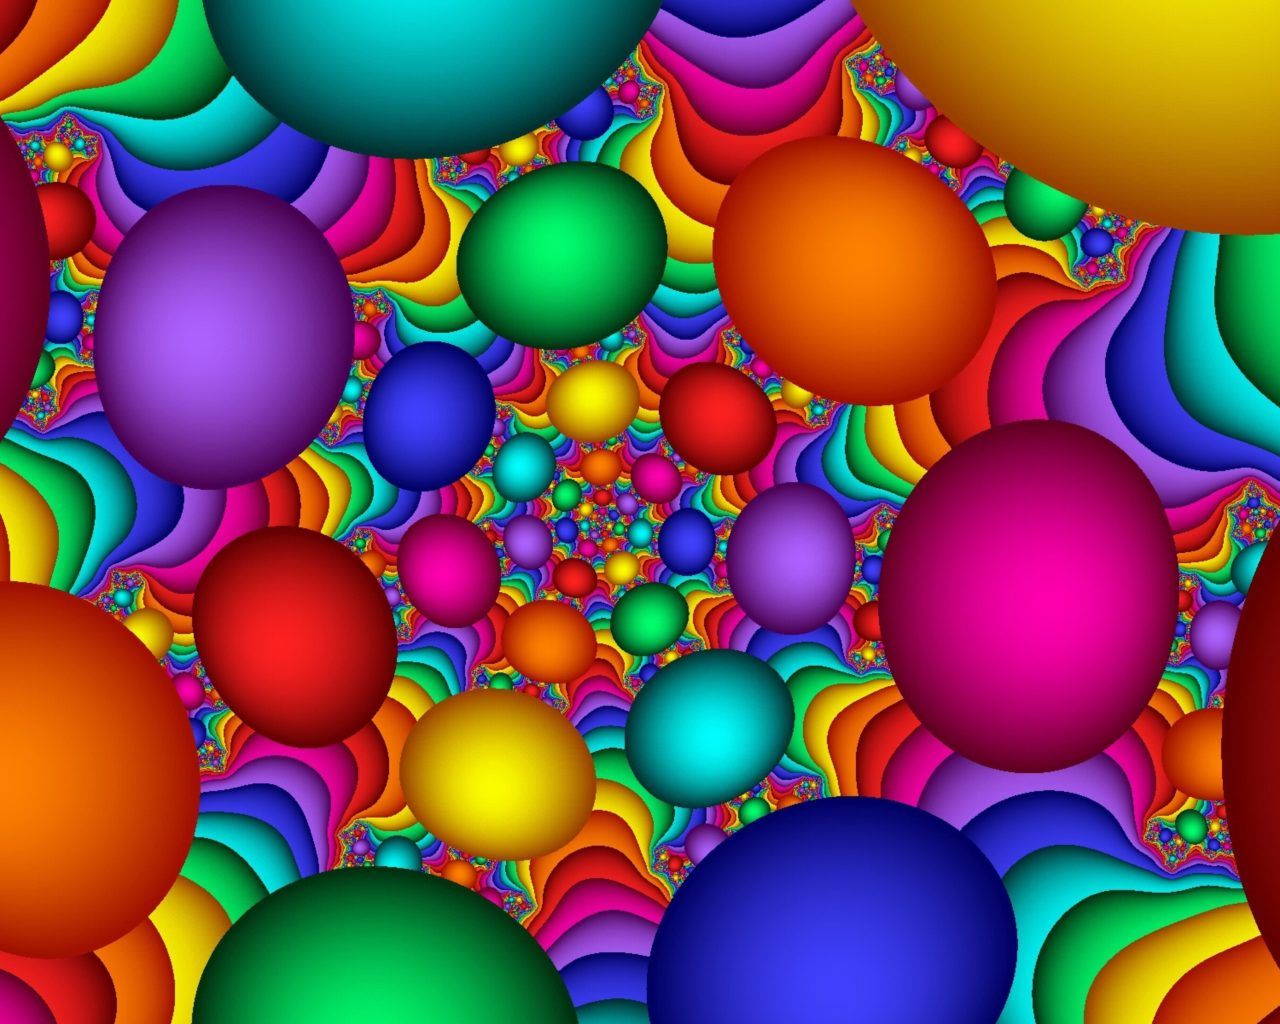 Colorful Bubbles Multicolor Abstract Background Wallpaper 3D Best HD Wallpaper For Desktop Tablets And Mobile Phones 3840x2400, Wallpaper13.com